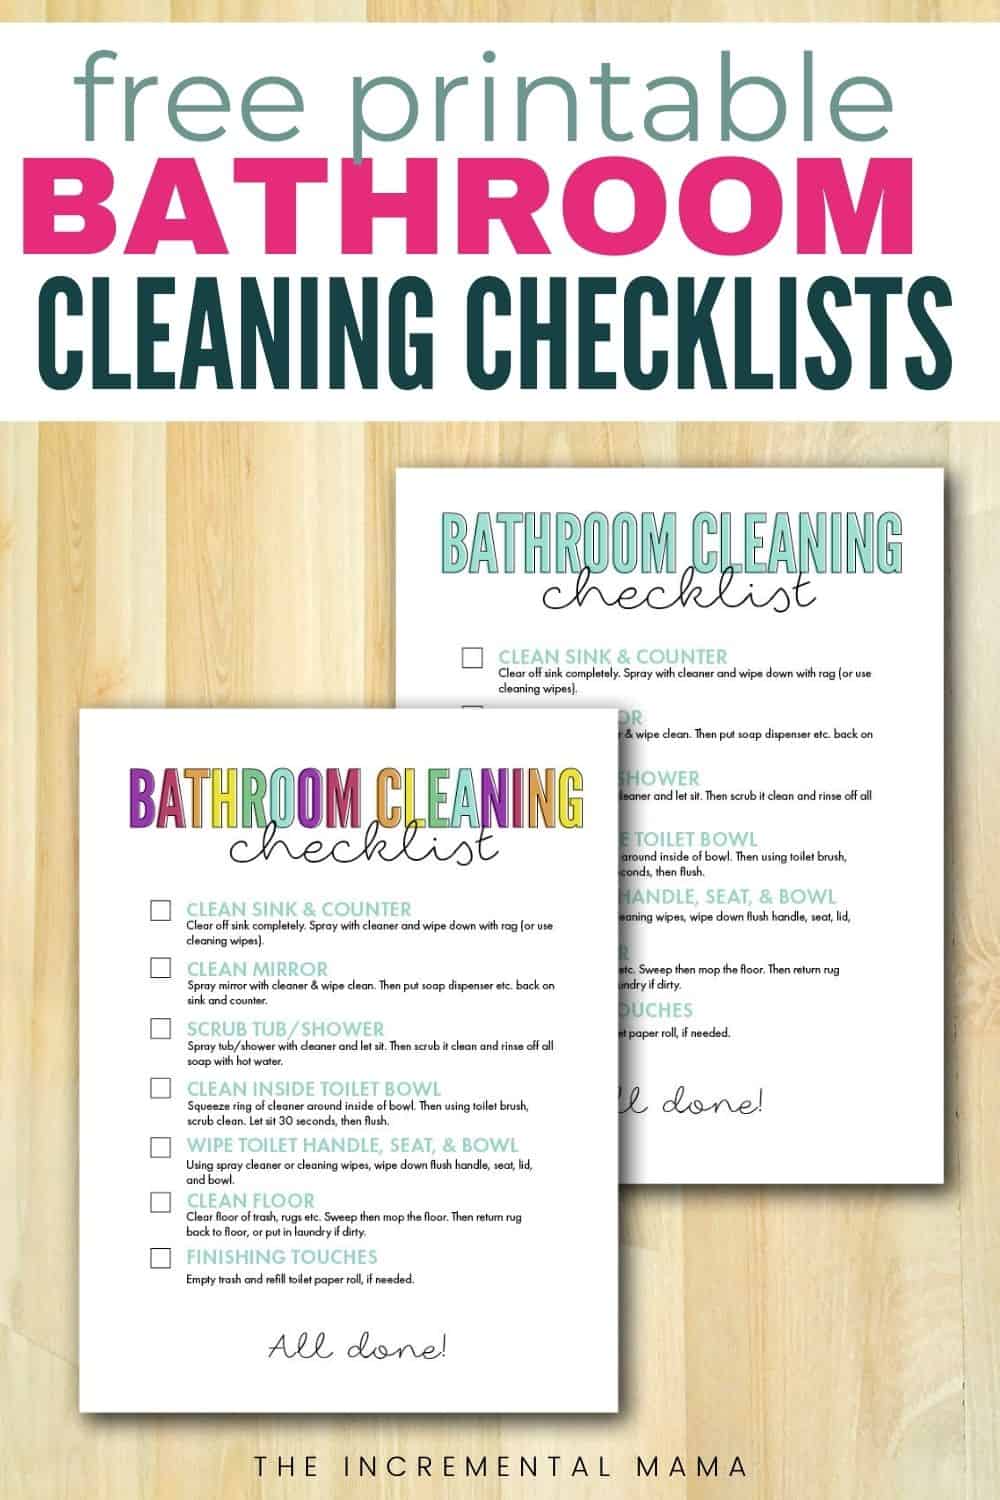 Free Printable Bathroom Cleaning Checklist for Kids